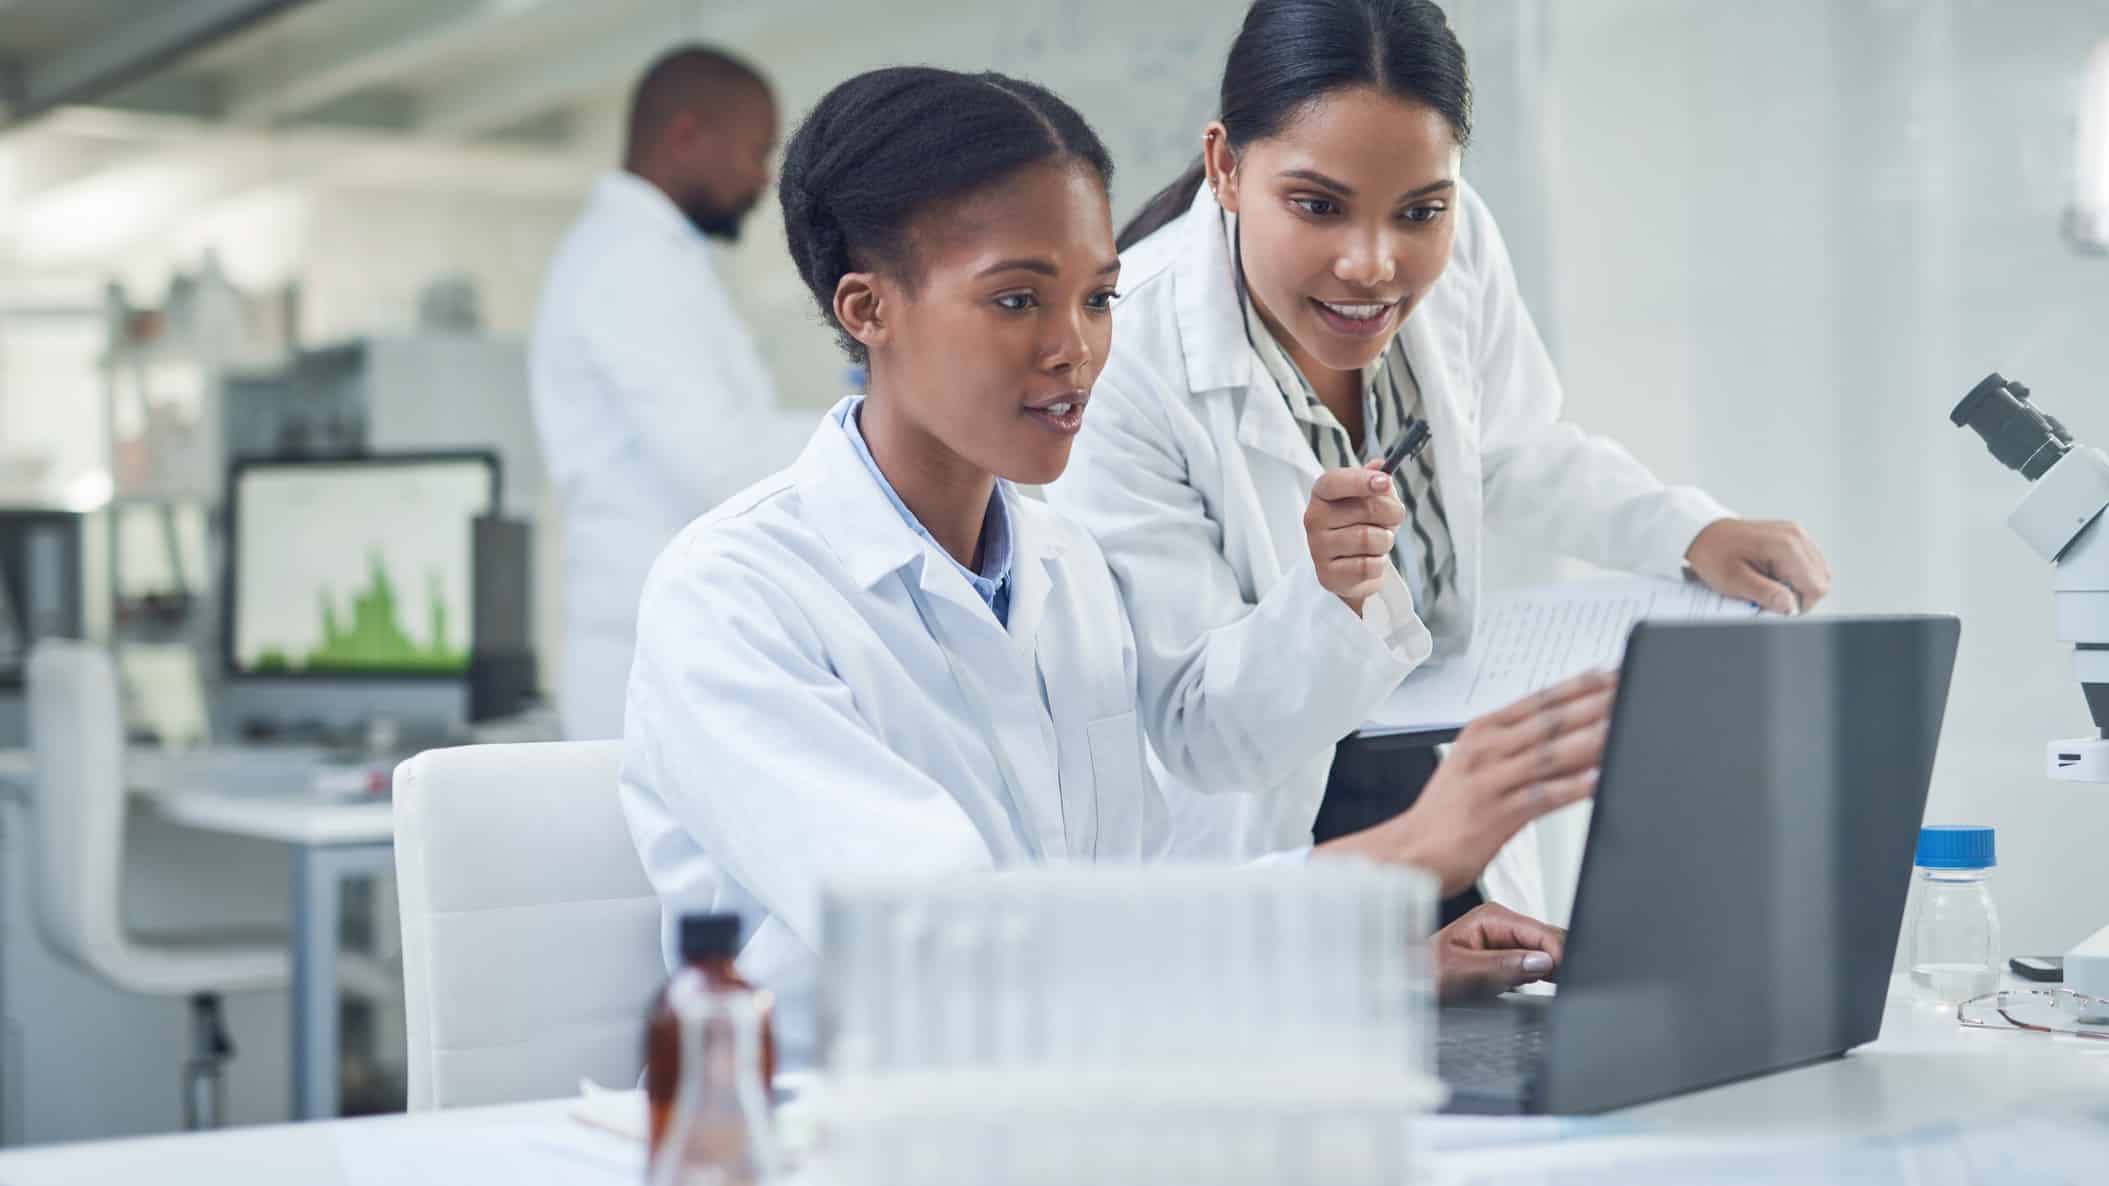 Two Archer Materials lab assistants wearing white coats discuss results they see on a computer screen